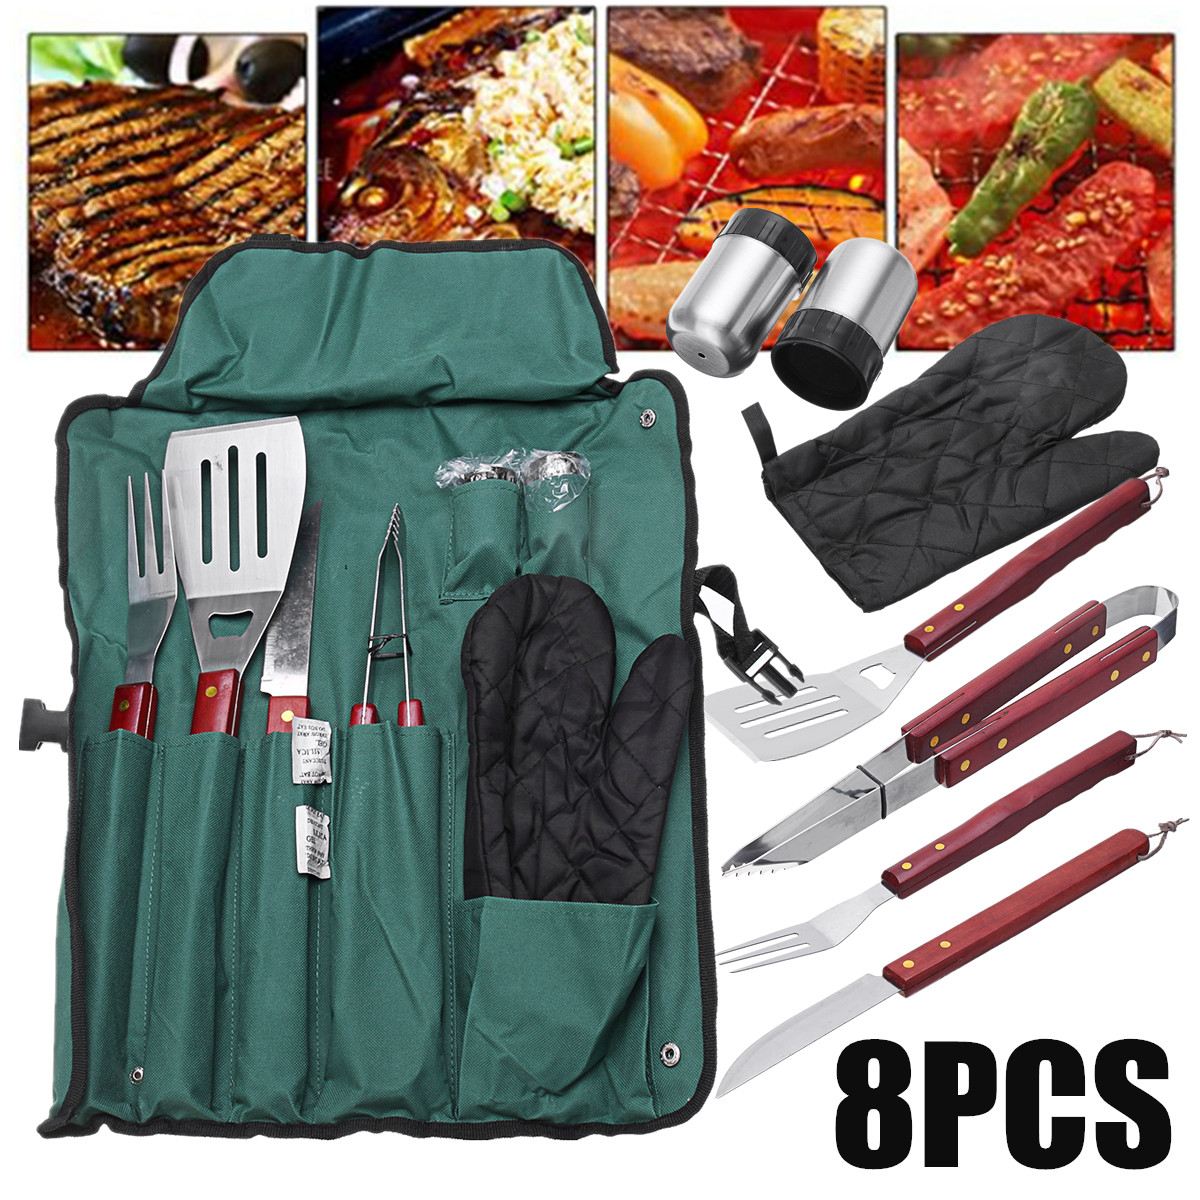 IPReereg-8Pcs-BBQ-Tools-Set-Stainless-Steel-Tableware-Barbecue-Grilling-Accessories-Kit-with-Portabl-1657945-1